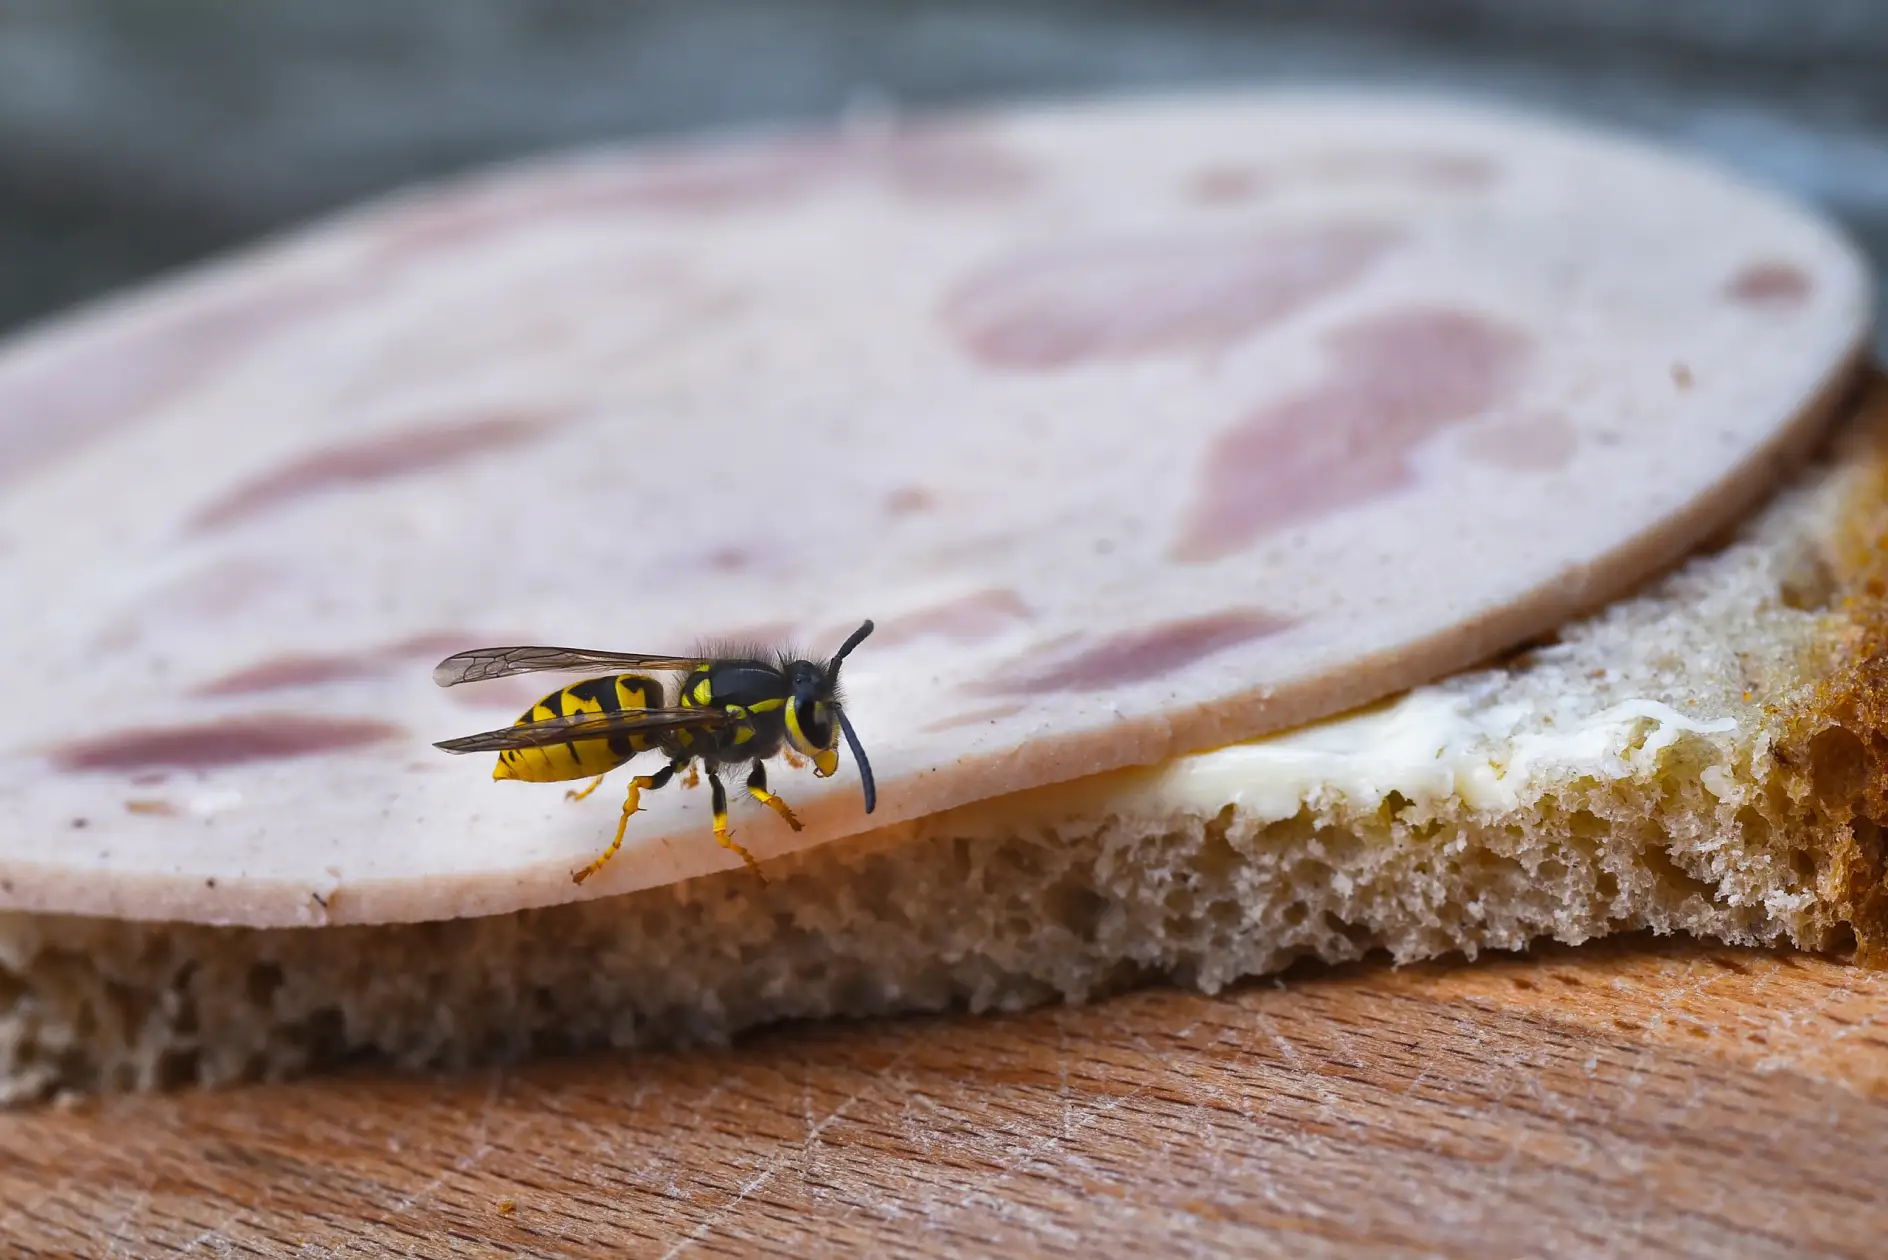 wasp or yellow jacket (Vespula germanica) on a sandwich with sausage, the wasp plague in summer is dangerous for allergy sufferers, close up with copy space, selected focus, narrow depth of field